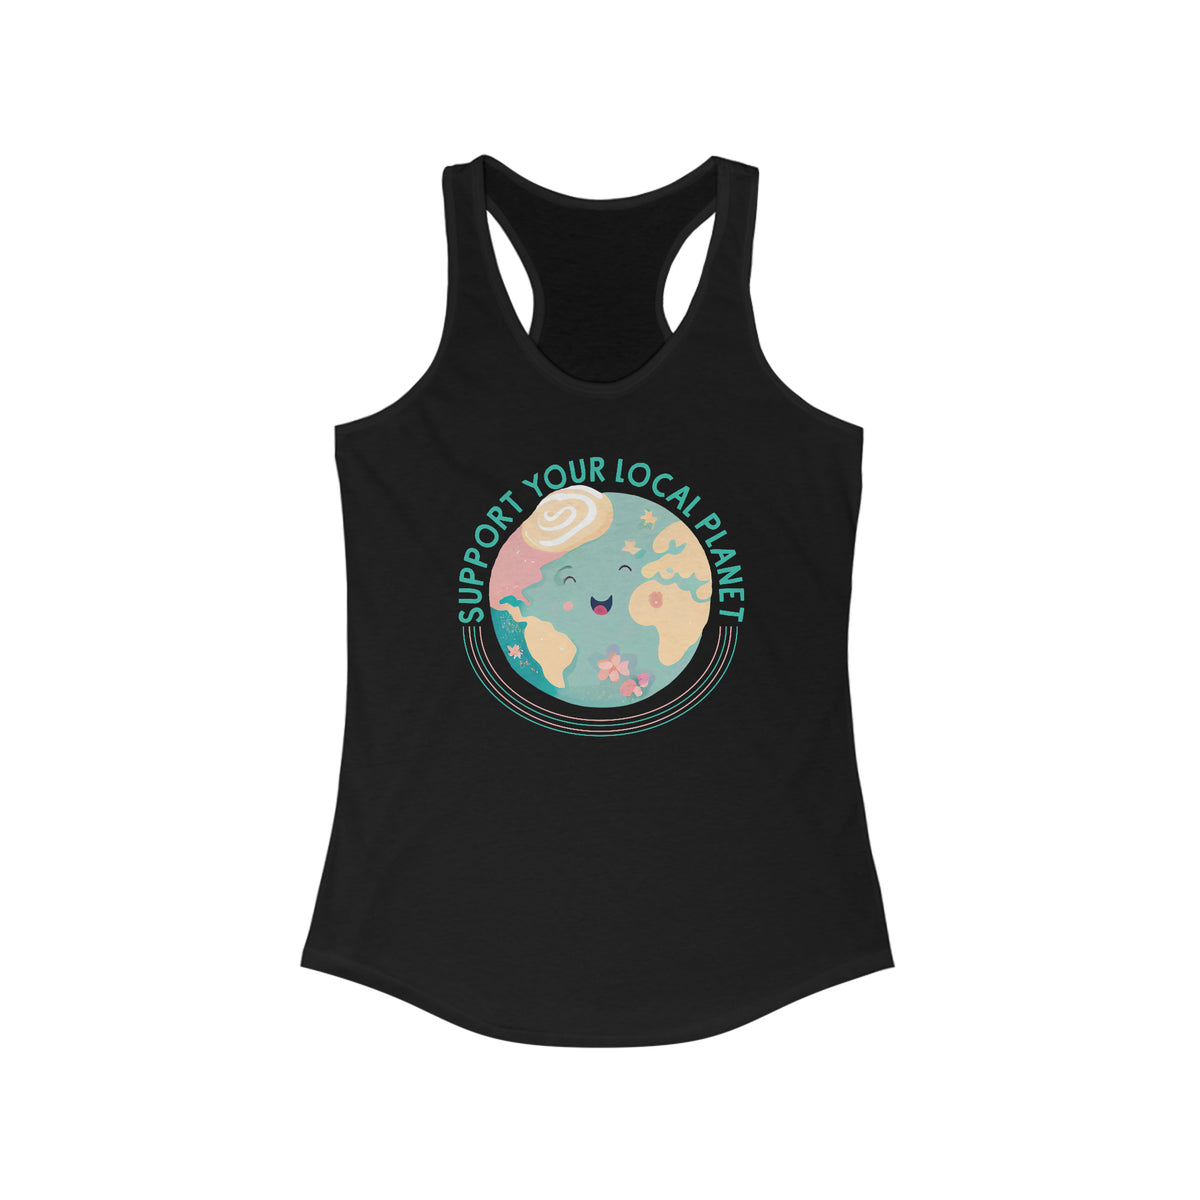 Support Your Local Planet Earth Day Shirt | Kawaii Style shirt | Nature Shirt | Gift For Her | Women's Slim Fit Racerback Tank Top